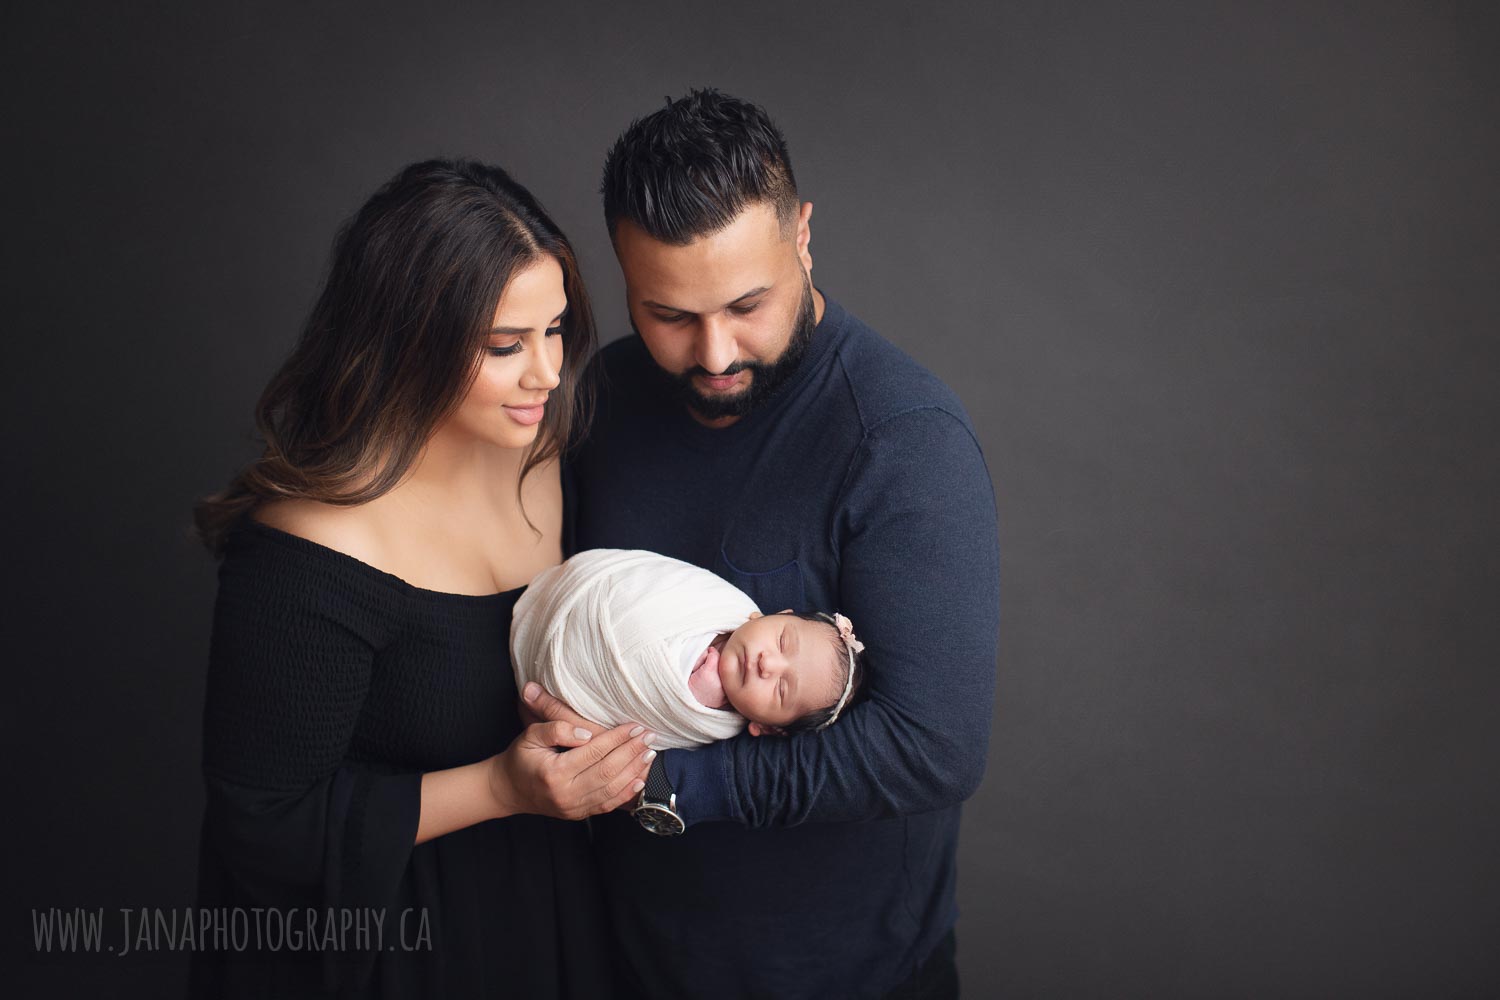 newborn photography - family - dad holding baby girl - grey background